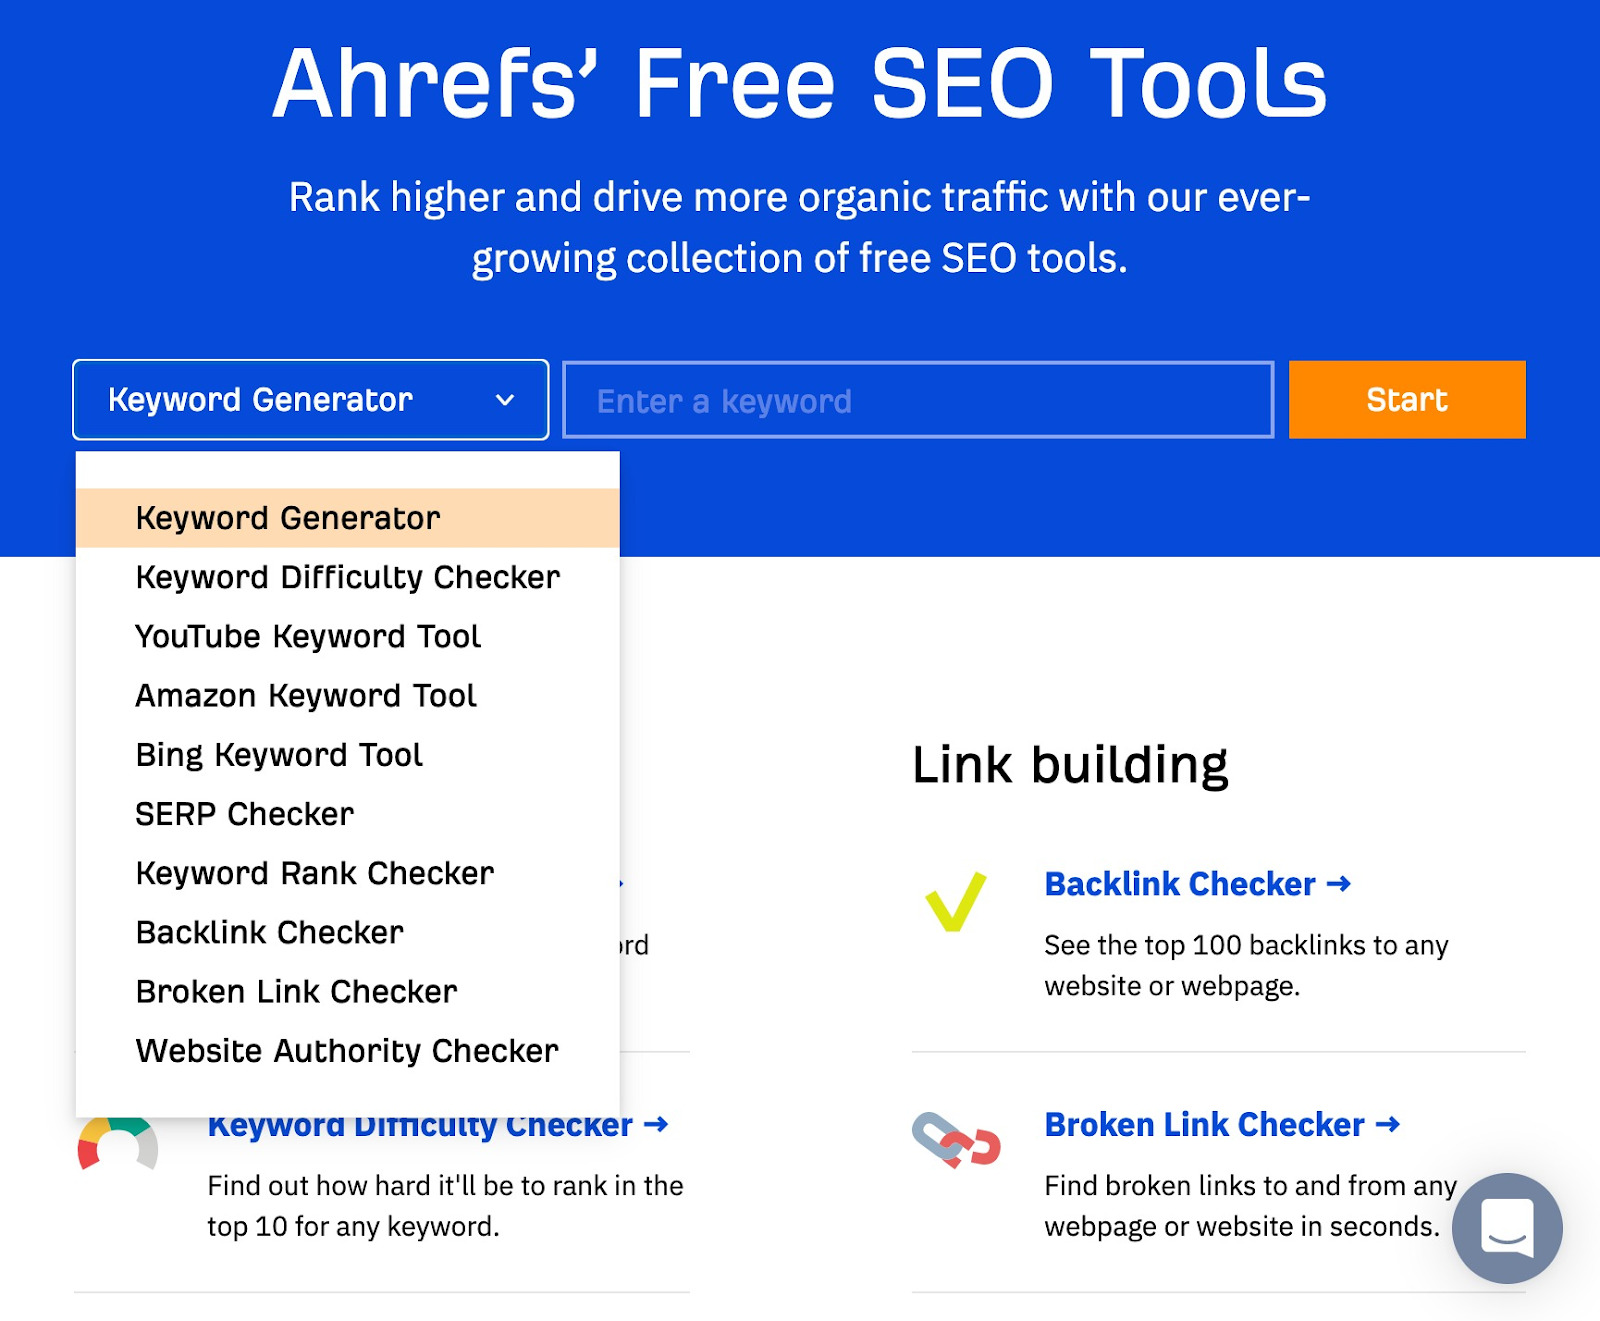 Ahrefs webpage featuring free tools